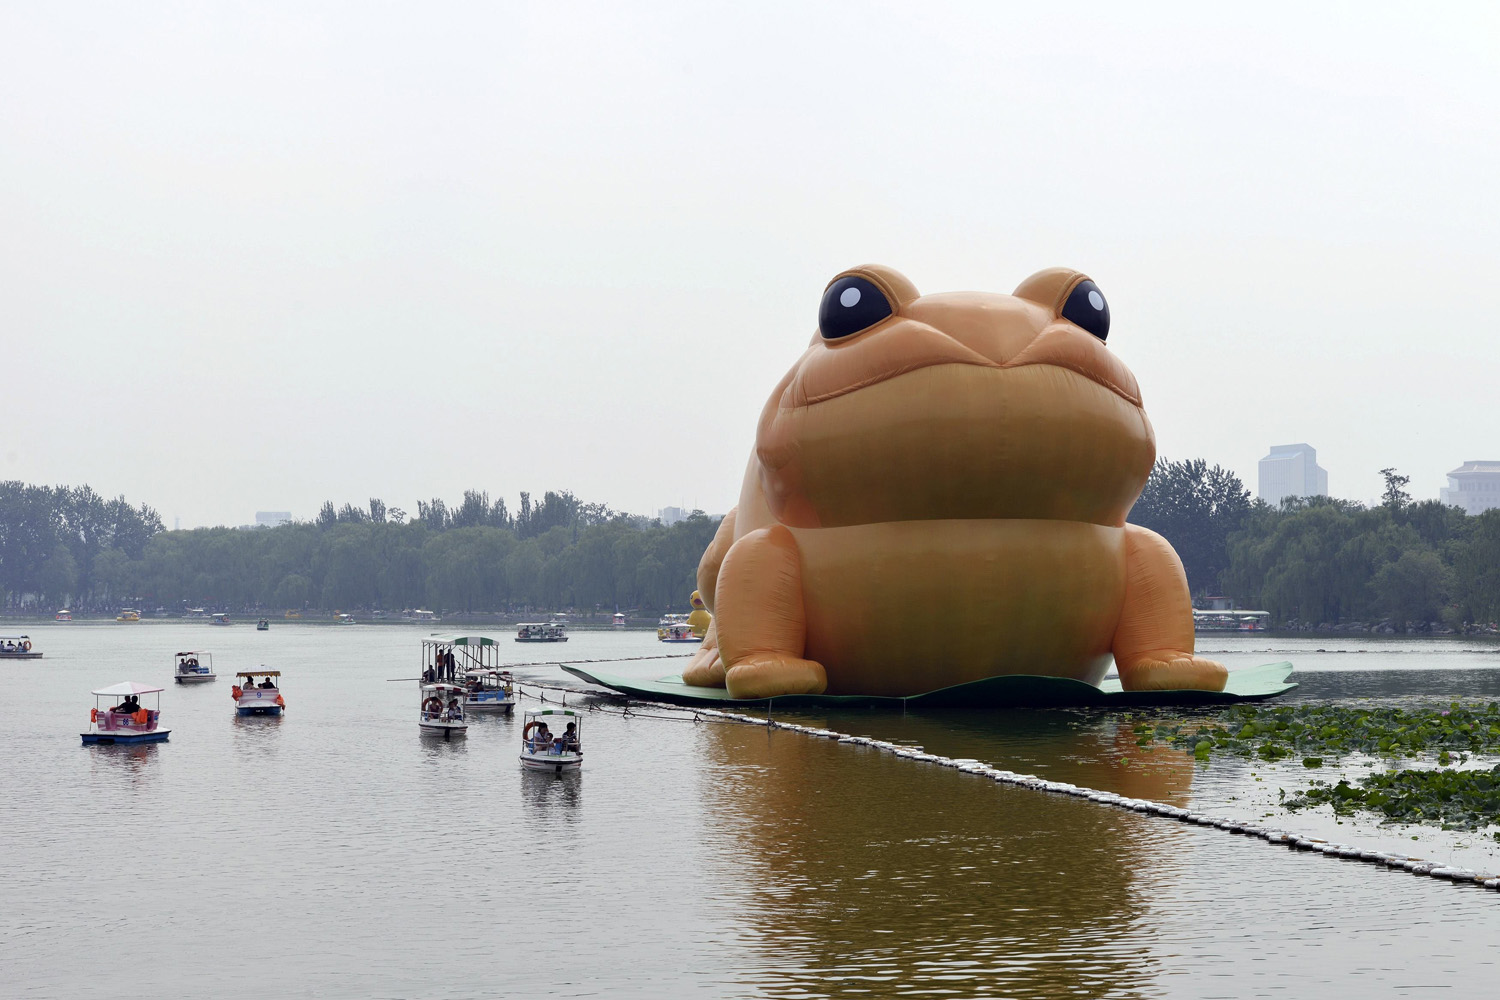 A giant inflatable toad is seen floating on a lake at the Yuyuantan Park in Beijing on July 19, 2014.